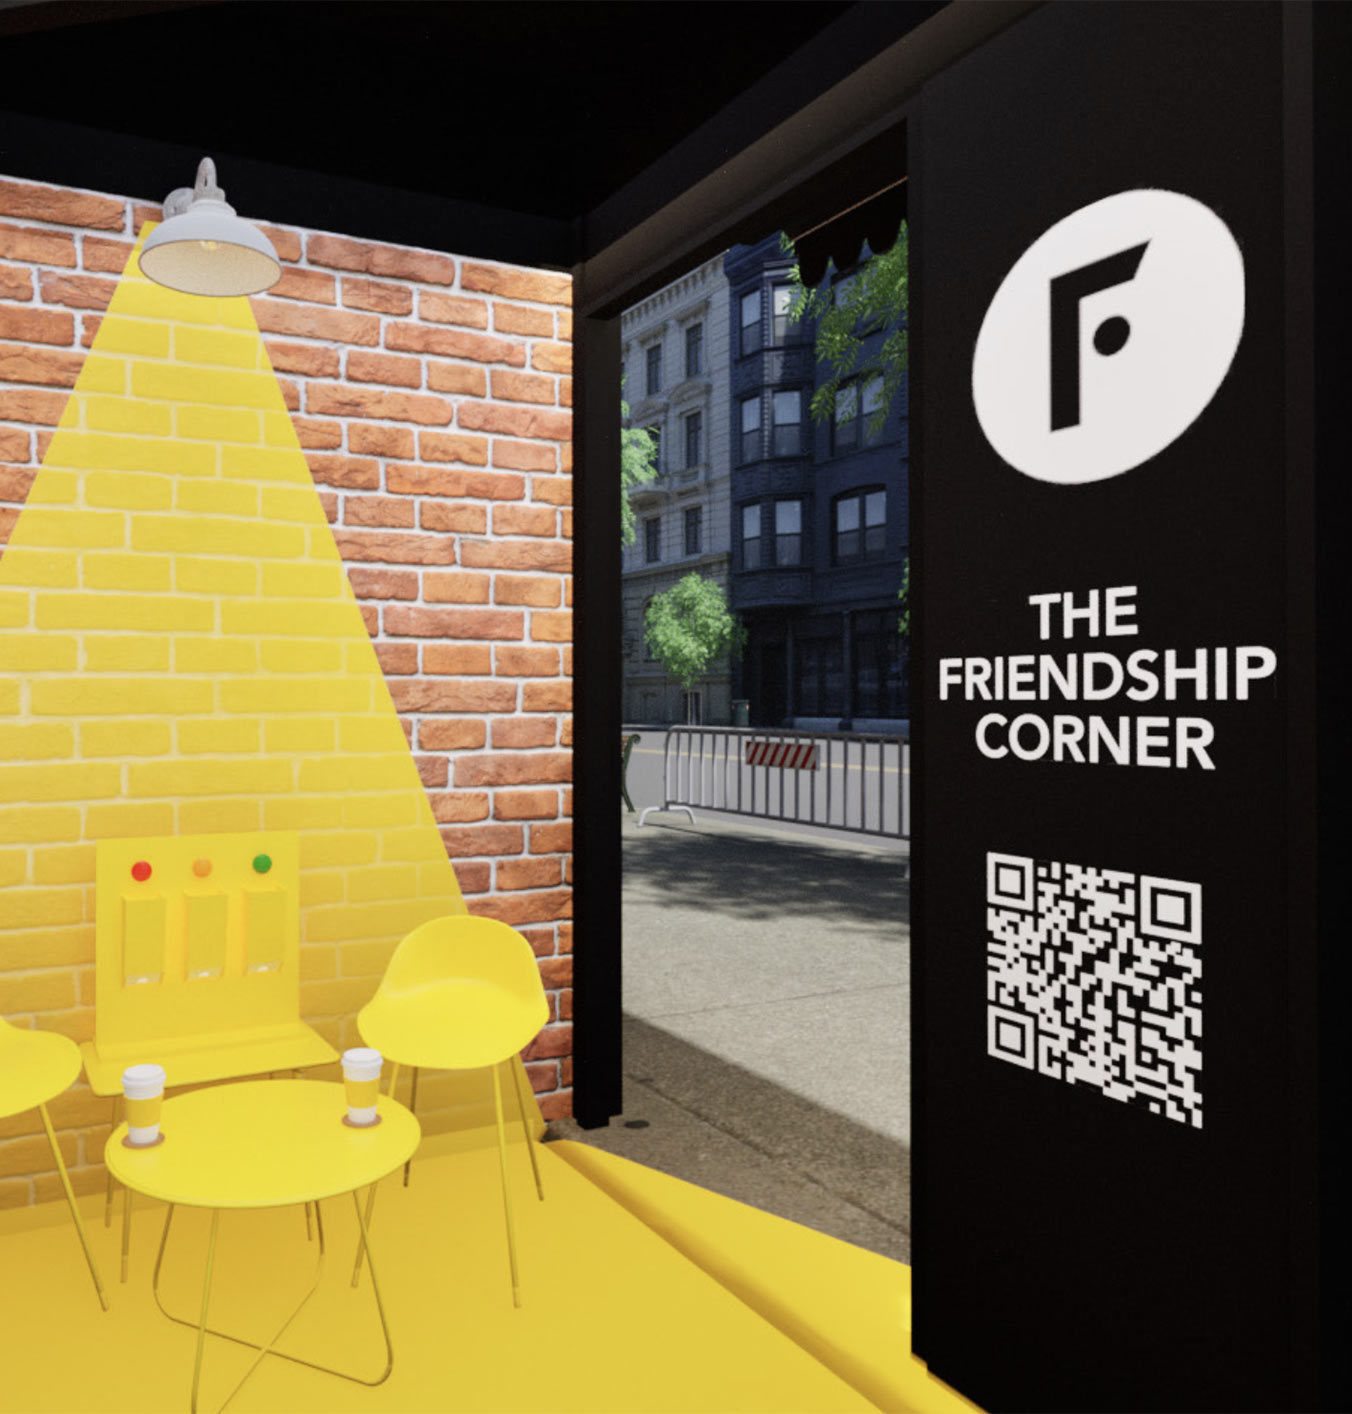 Introducing The Friendship Corner: a world-first space for meaningful connection